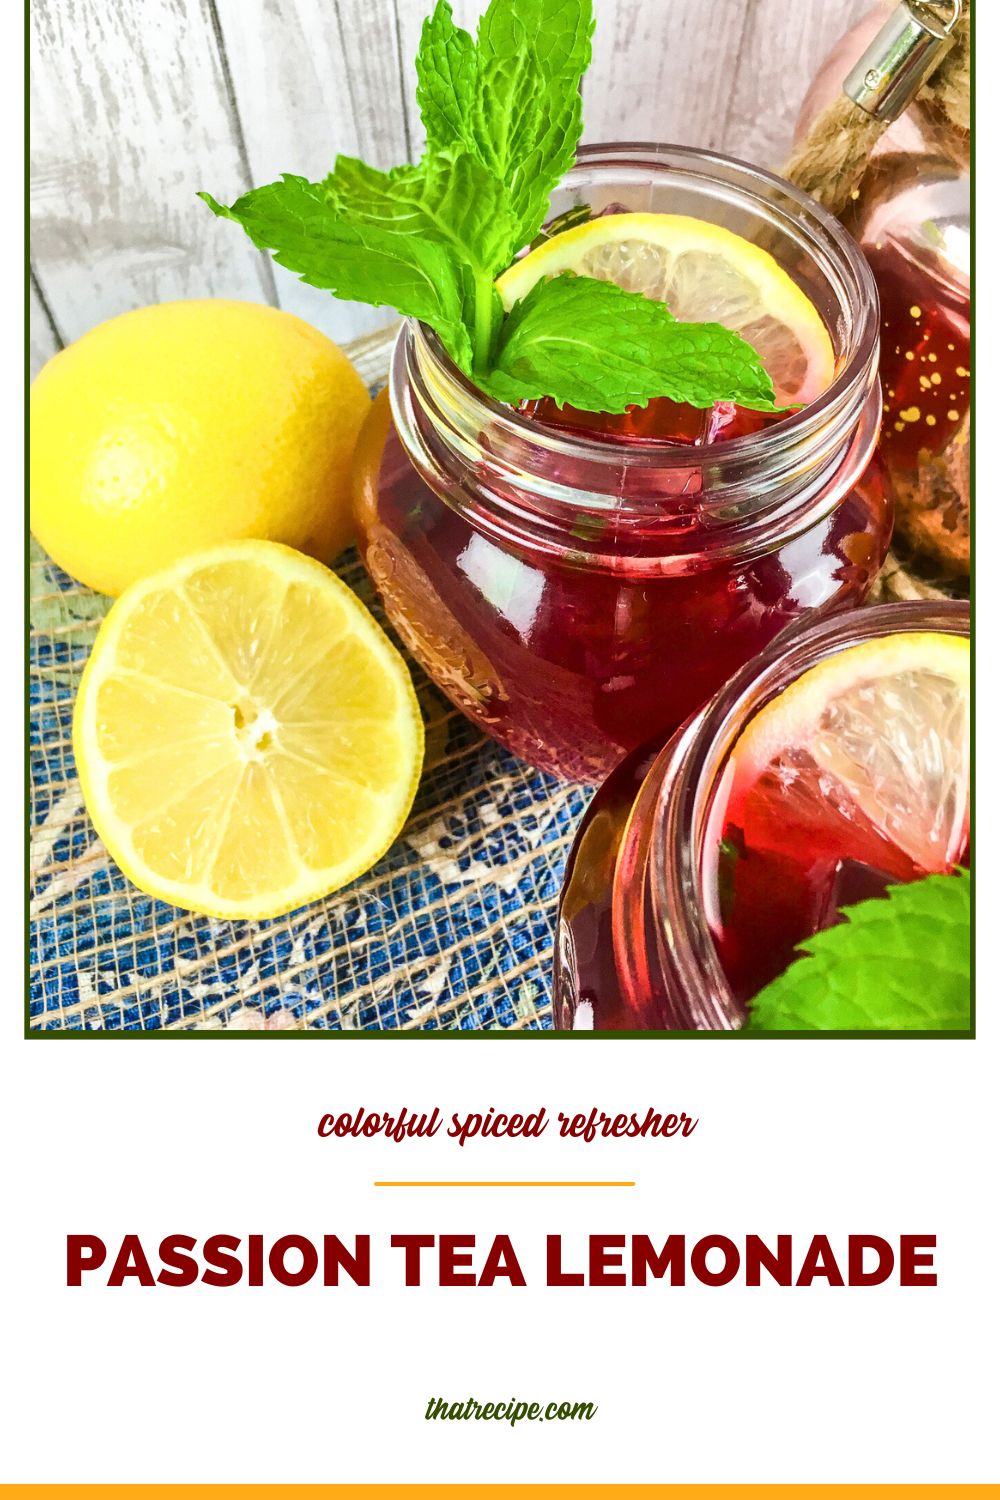 hibiscus tea in a glass with text overlay "passion tea lemonade"